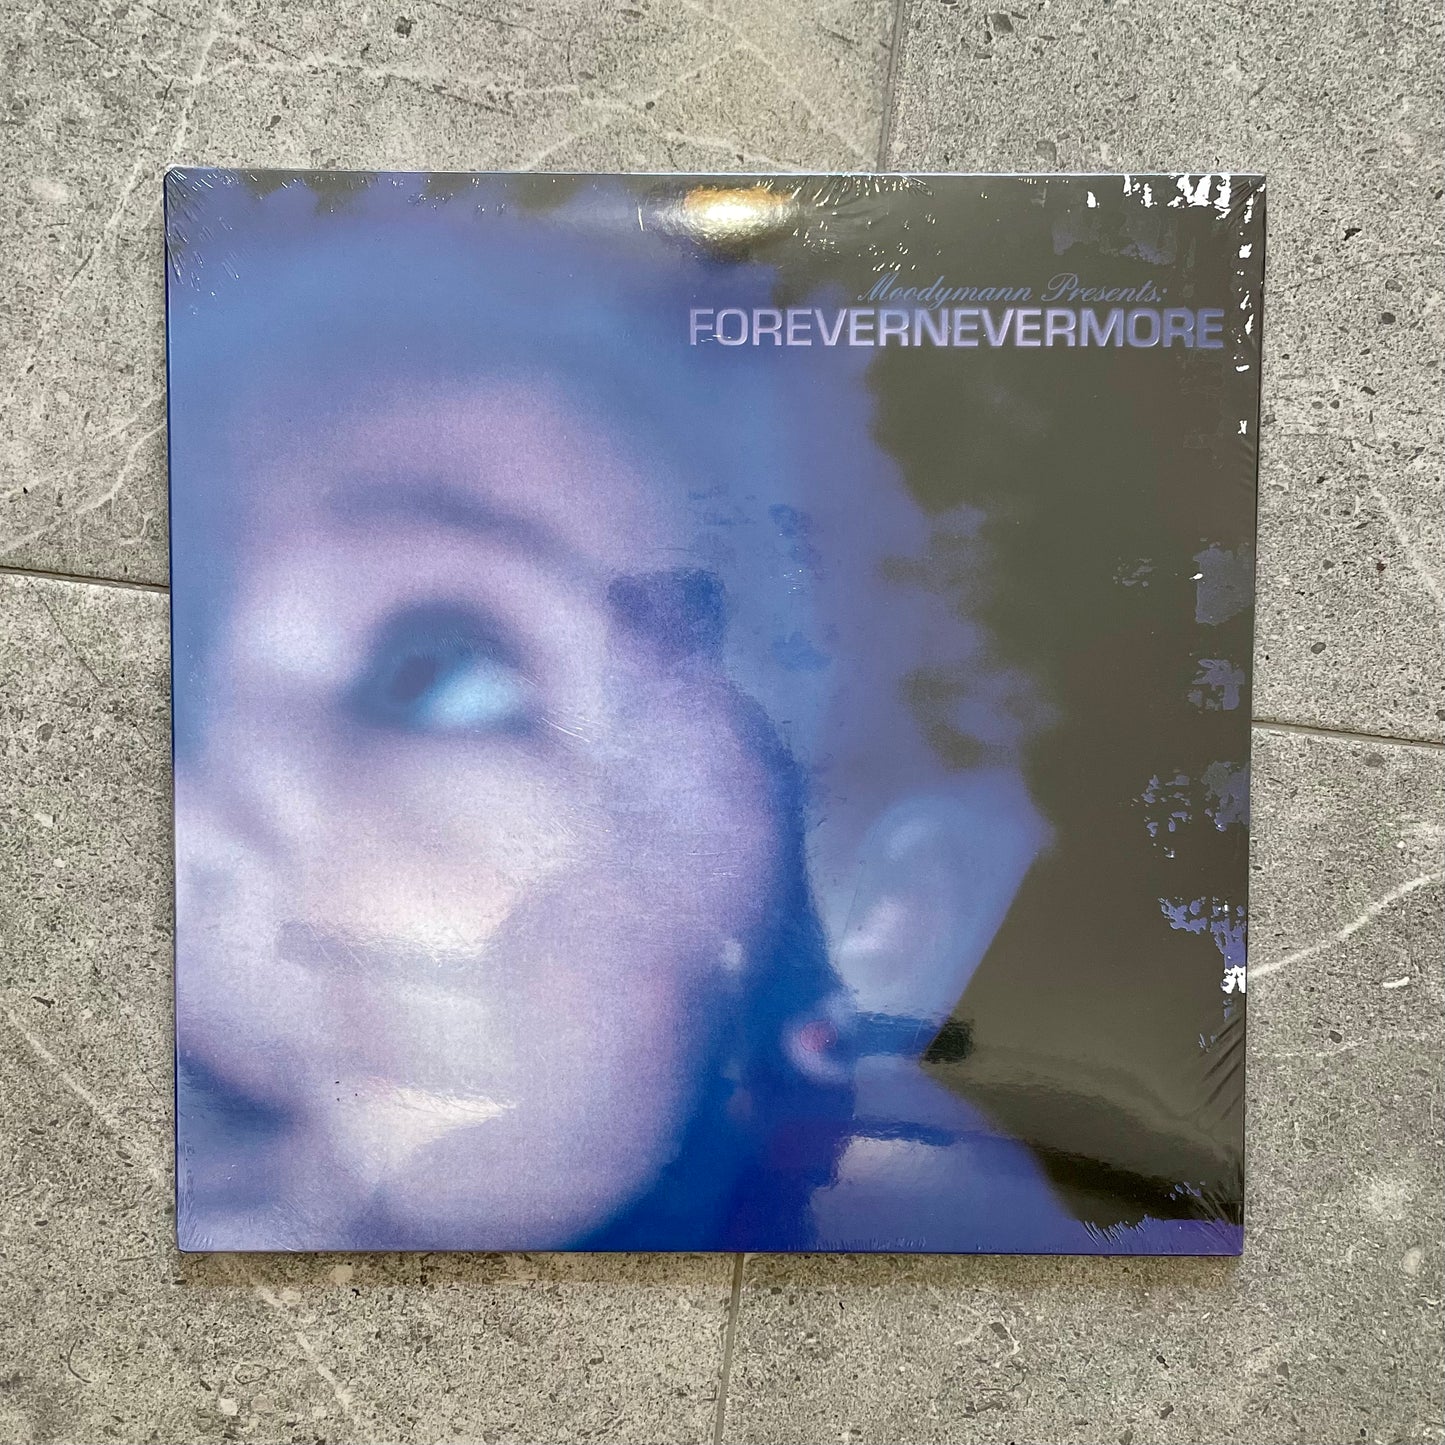 Moodyman - forevernevermore (clear vinyl)